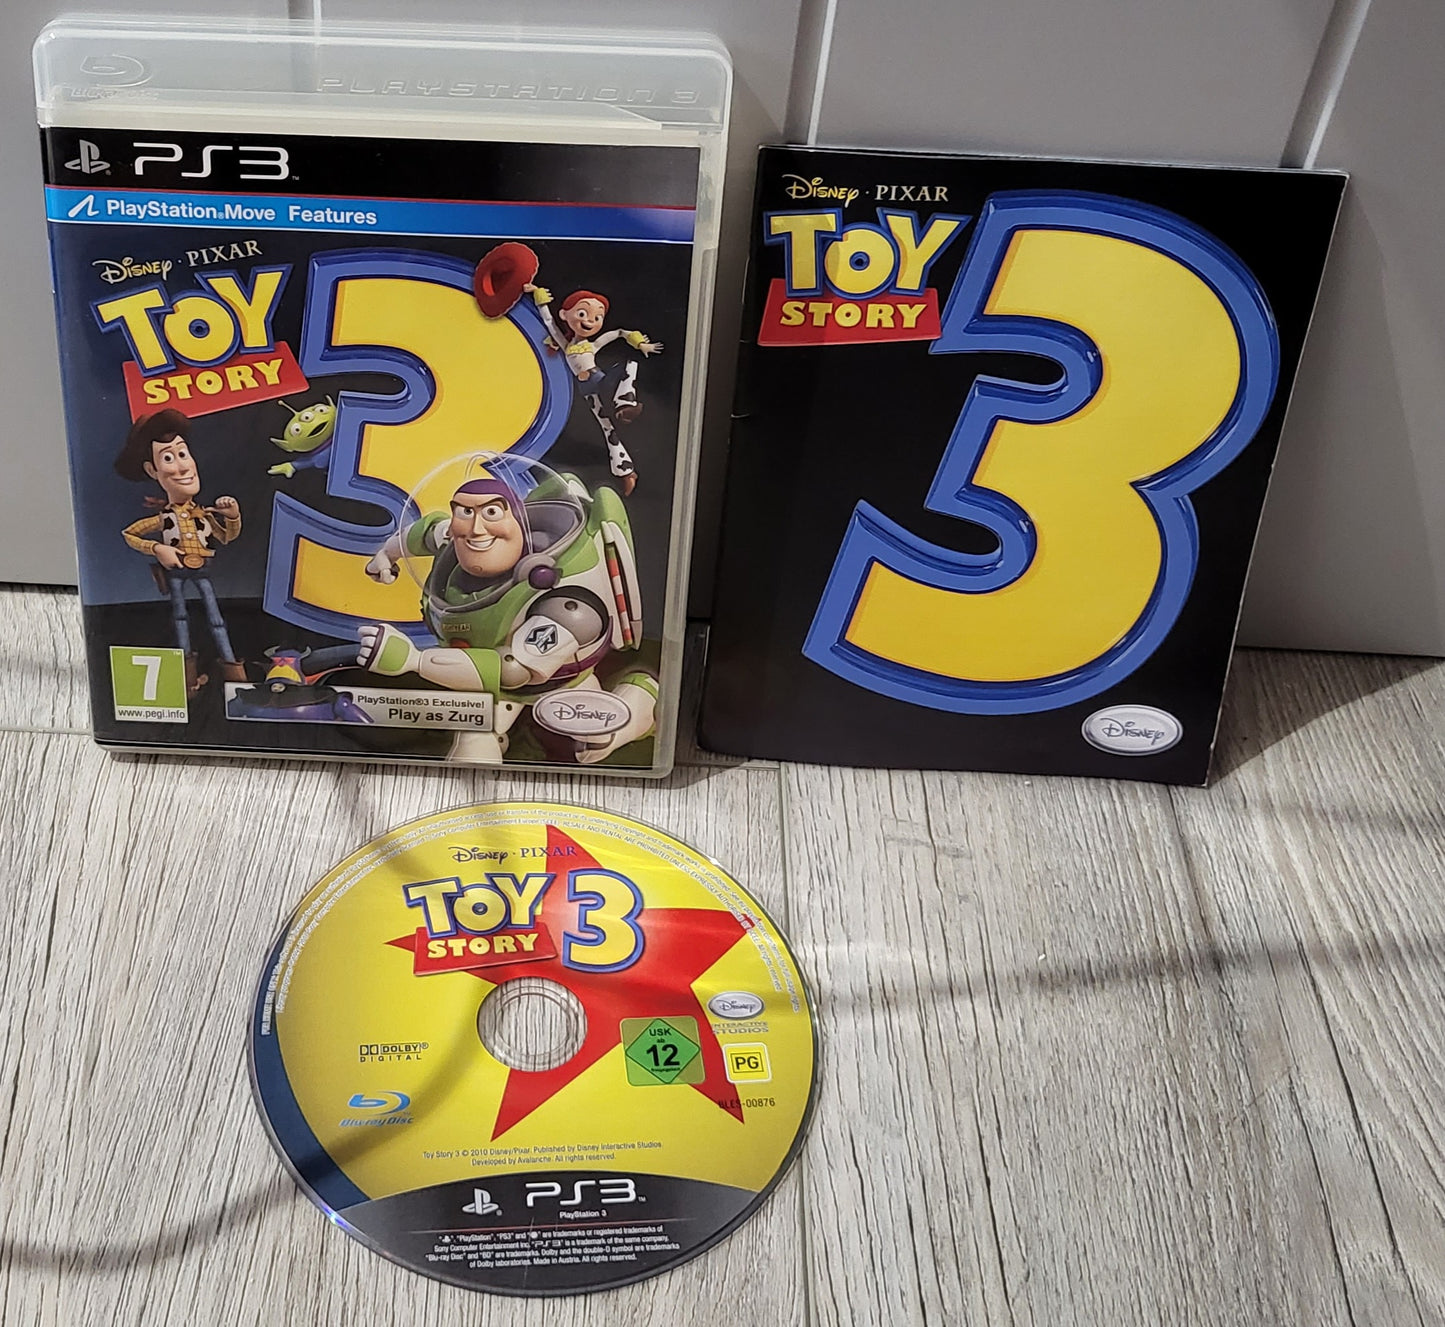 Toy Story 3 Sony Playstation 3 (PS3) Game